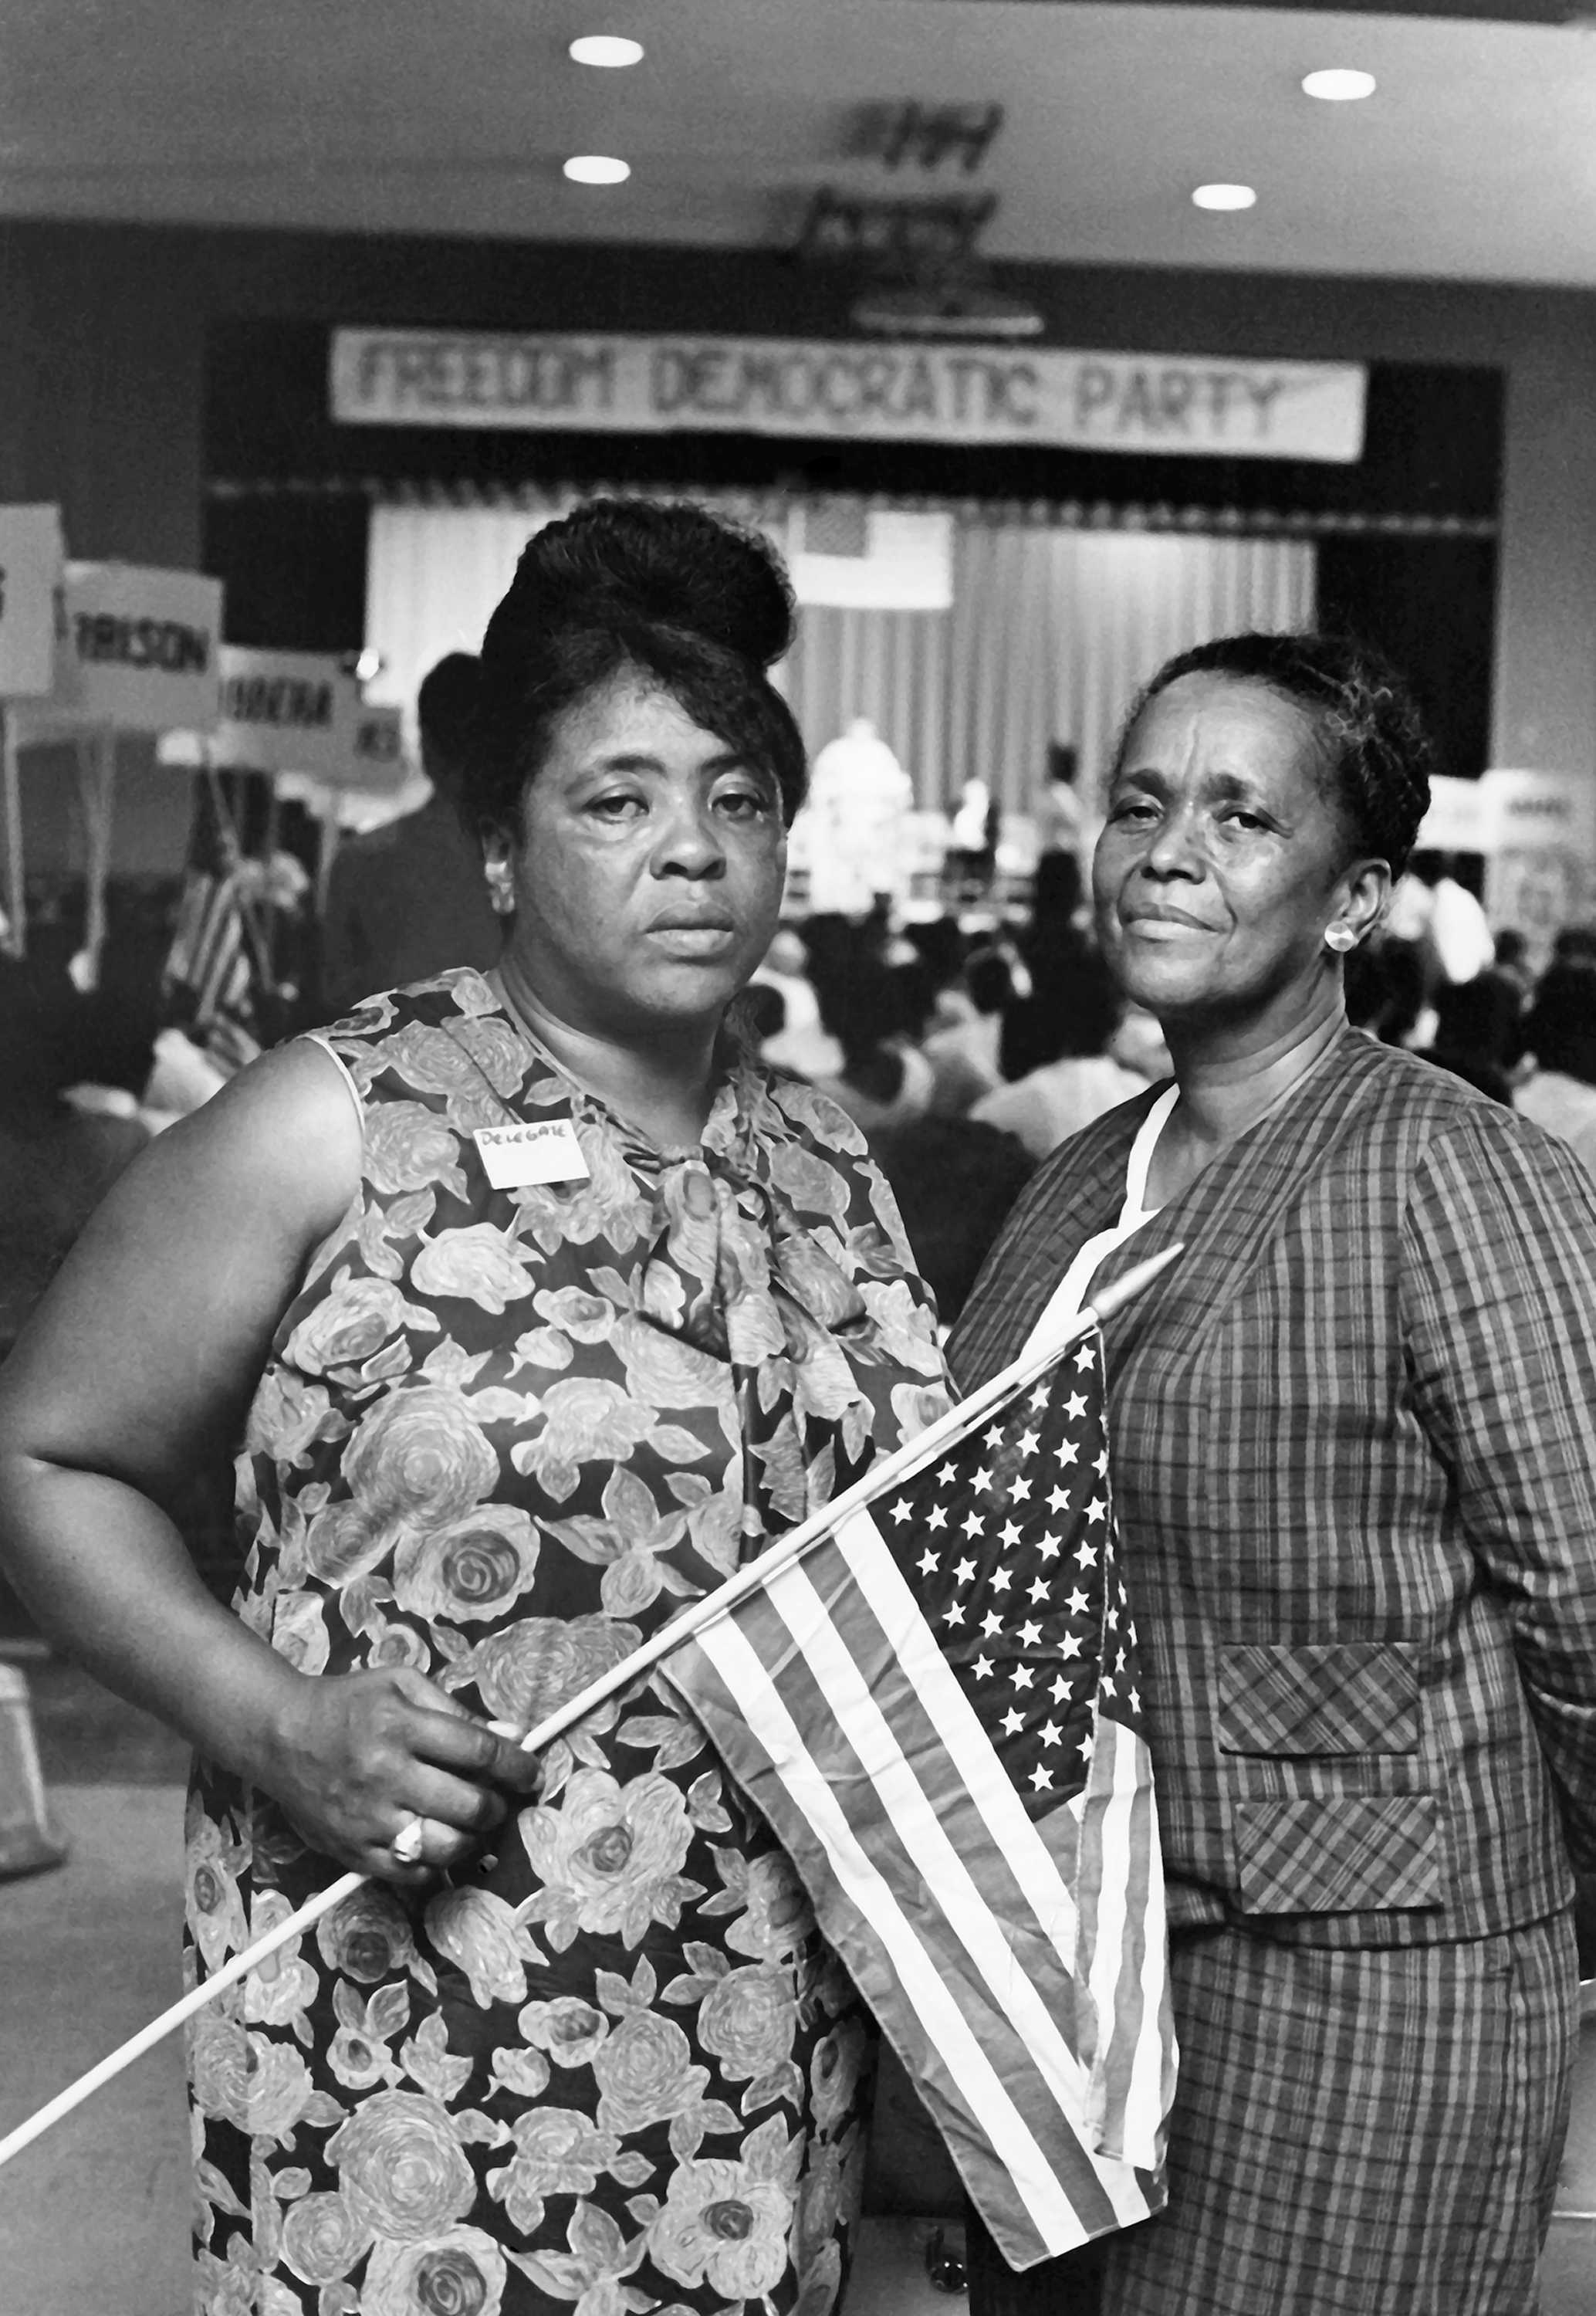 Black and white photograph of Fannie Lou Hamer and Ella Baker at the Mississippi Freedom Democratic Party state convention holding an American flag